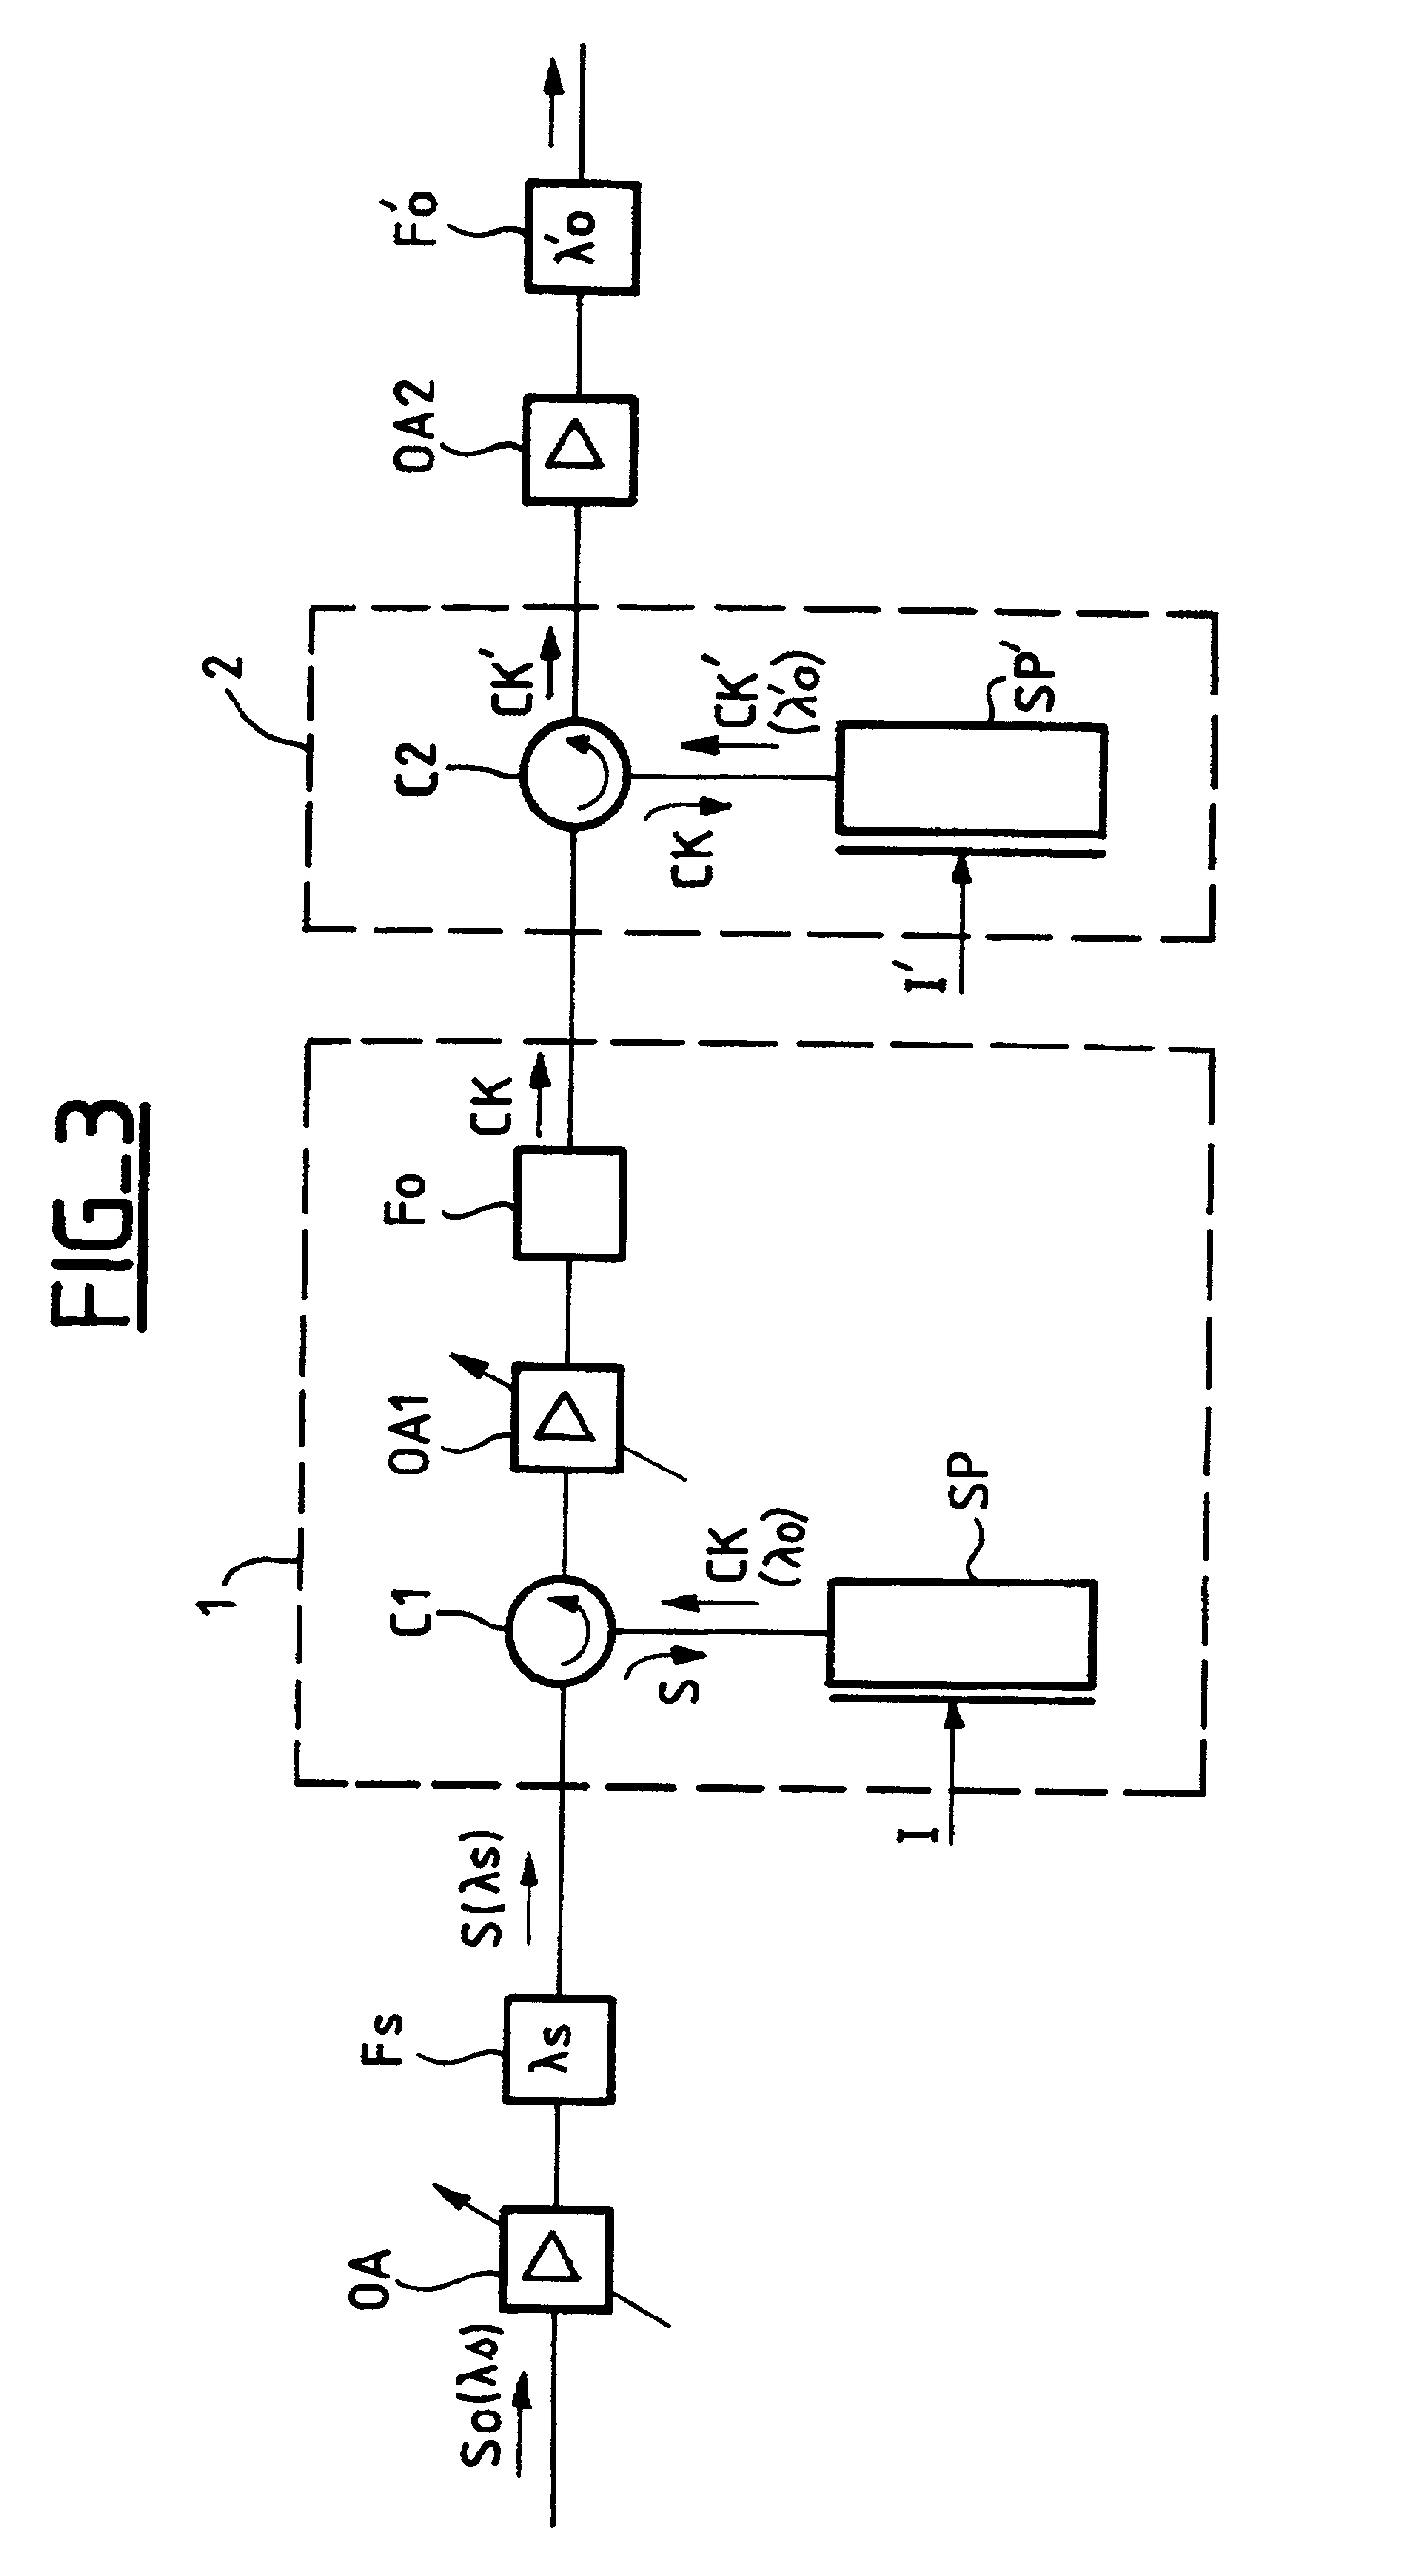 Optical clock recovery device for recovering the clock from an optical signal